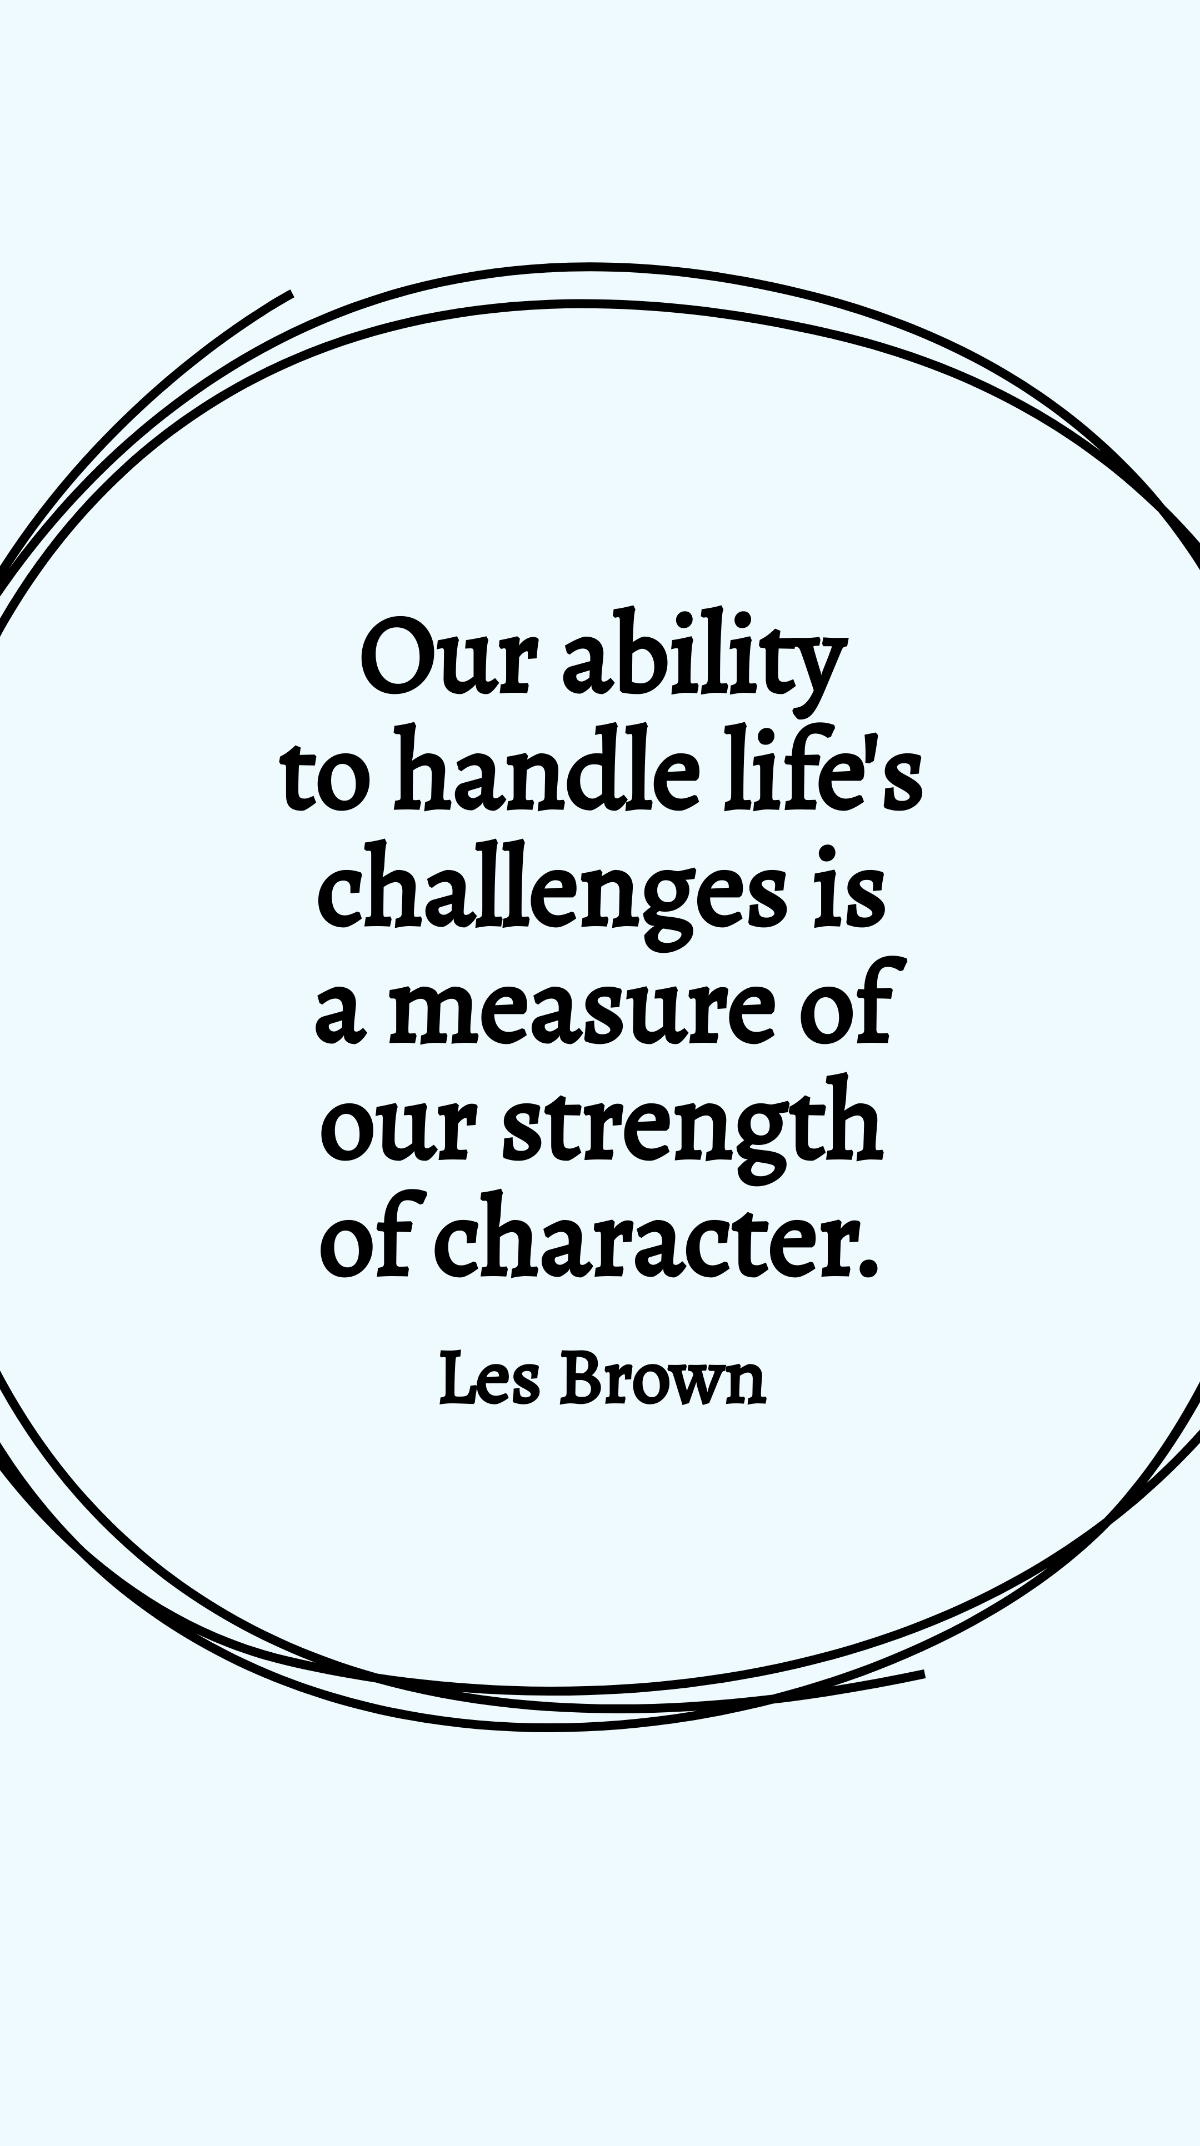 Les Brown - Our ability to handle life's challenges is a measure of our strength of character. Template